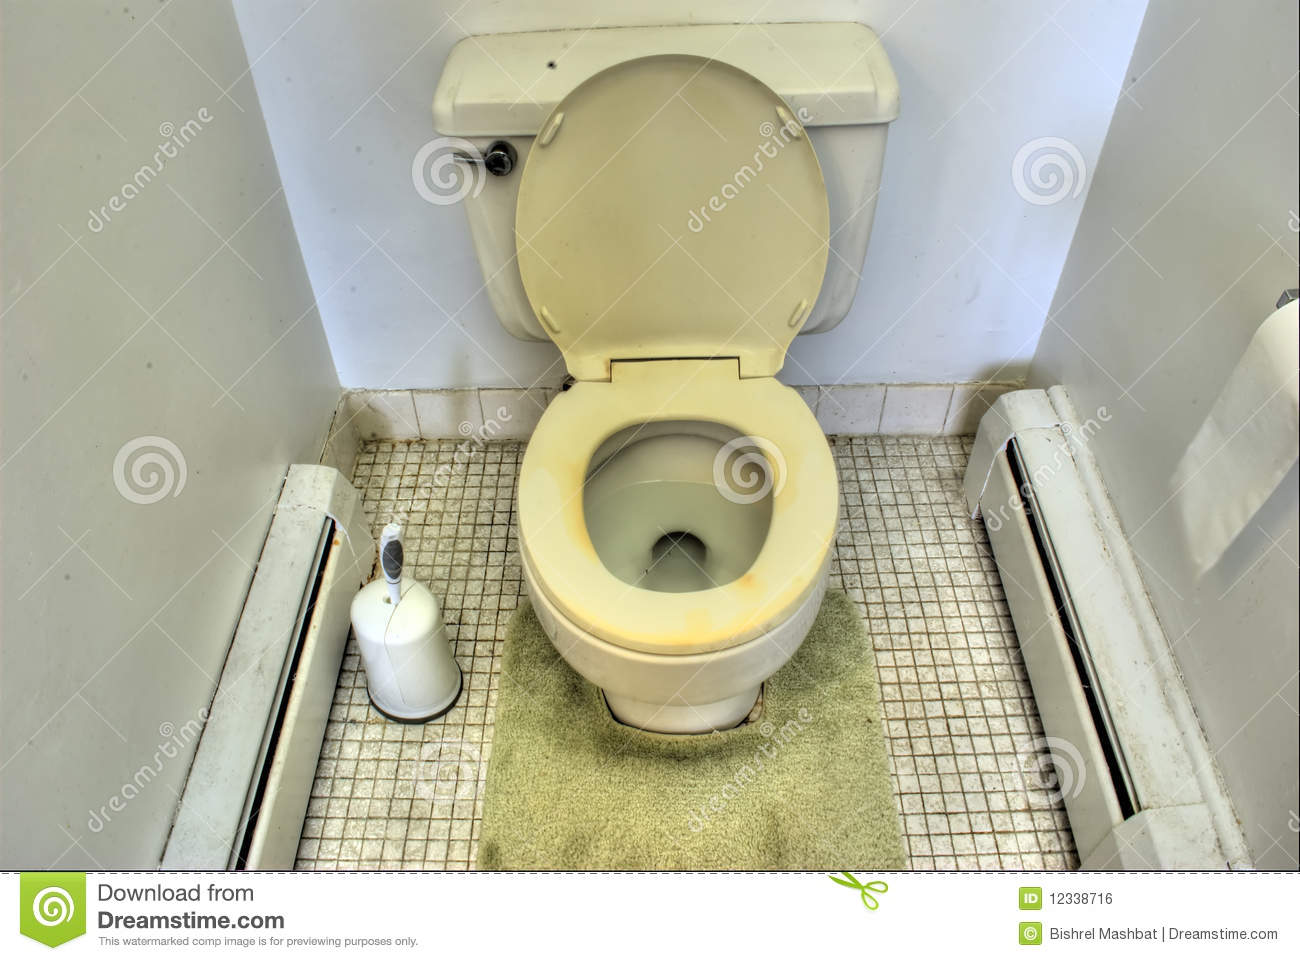 Dirty Toilet Royalty Free Stock Image   Image  12338716